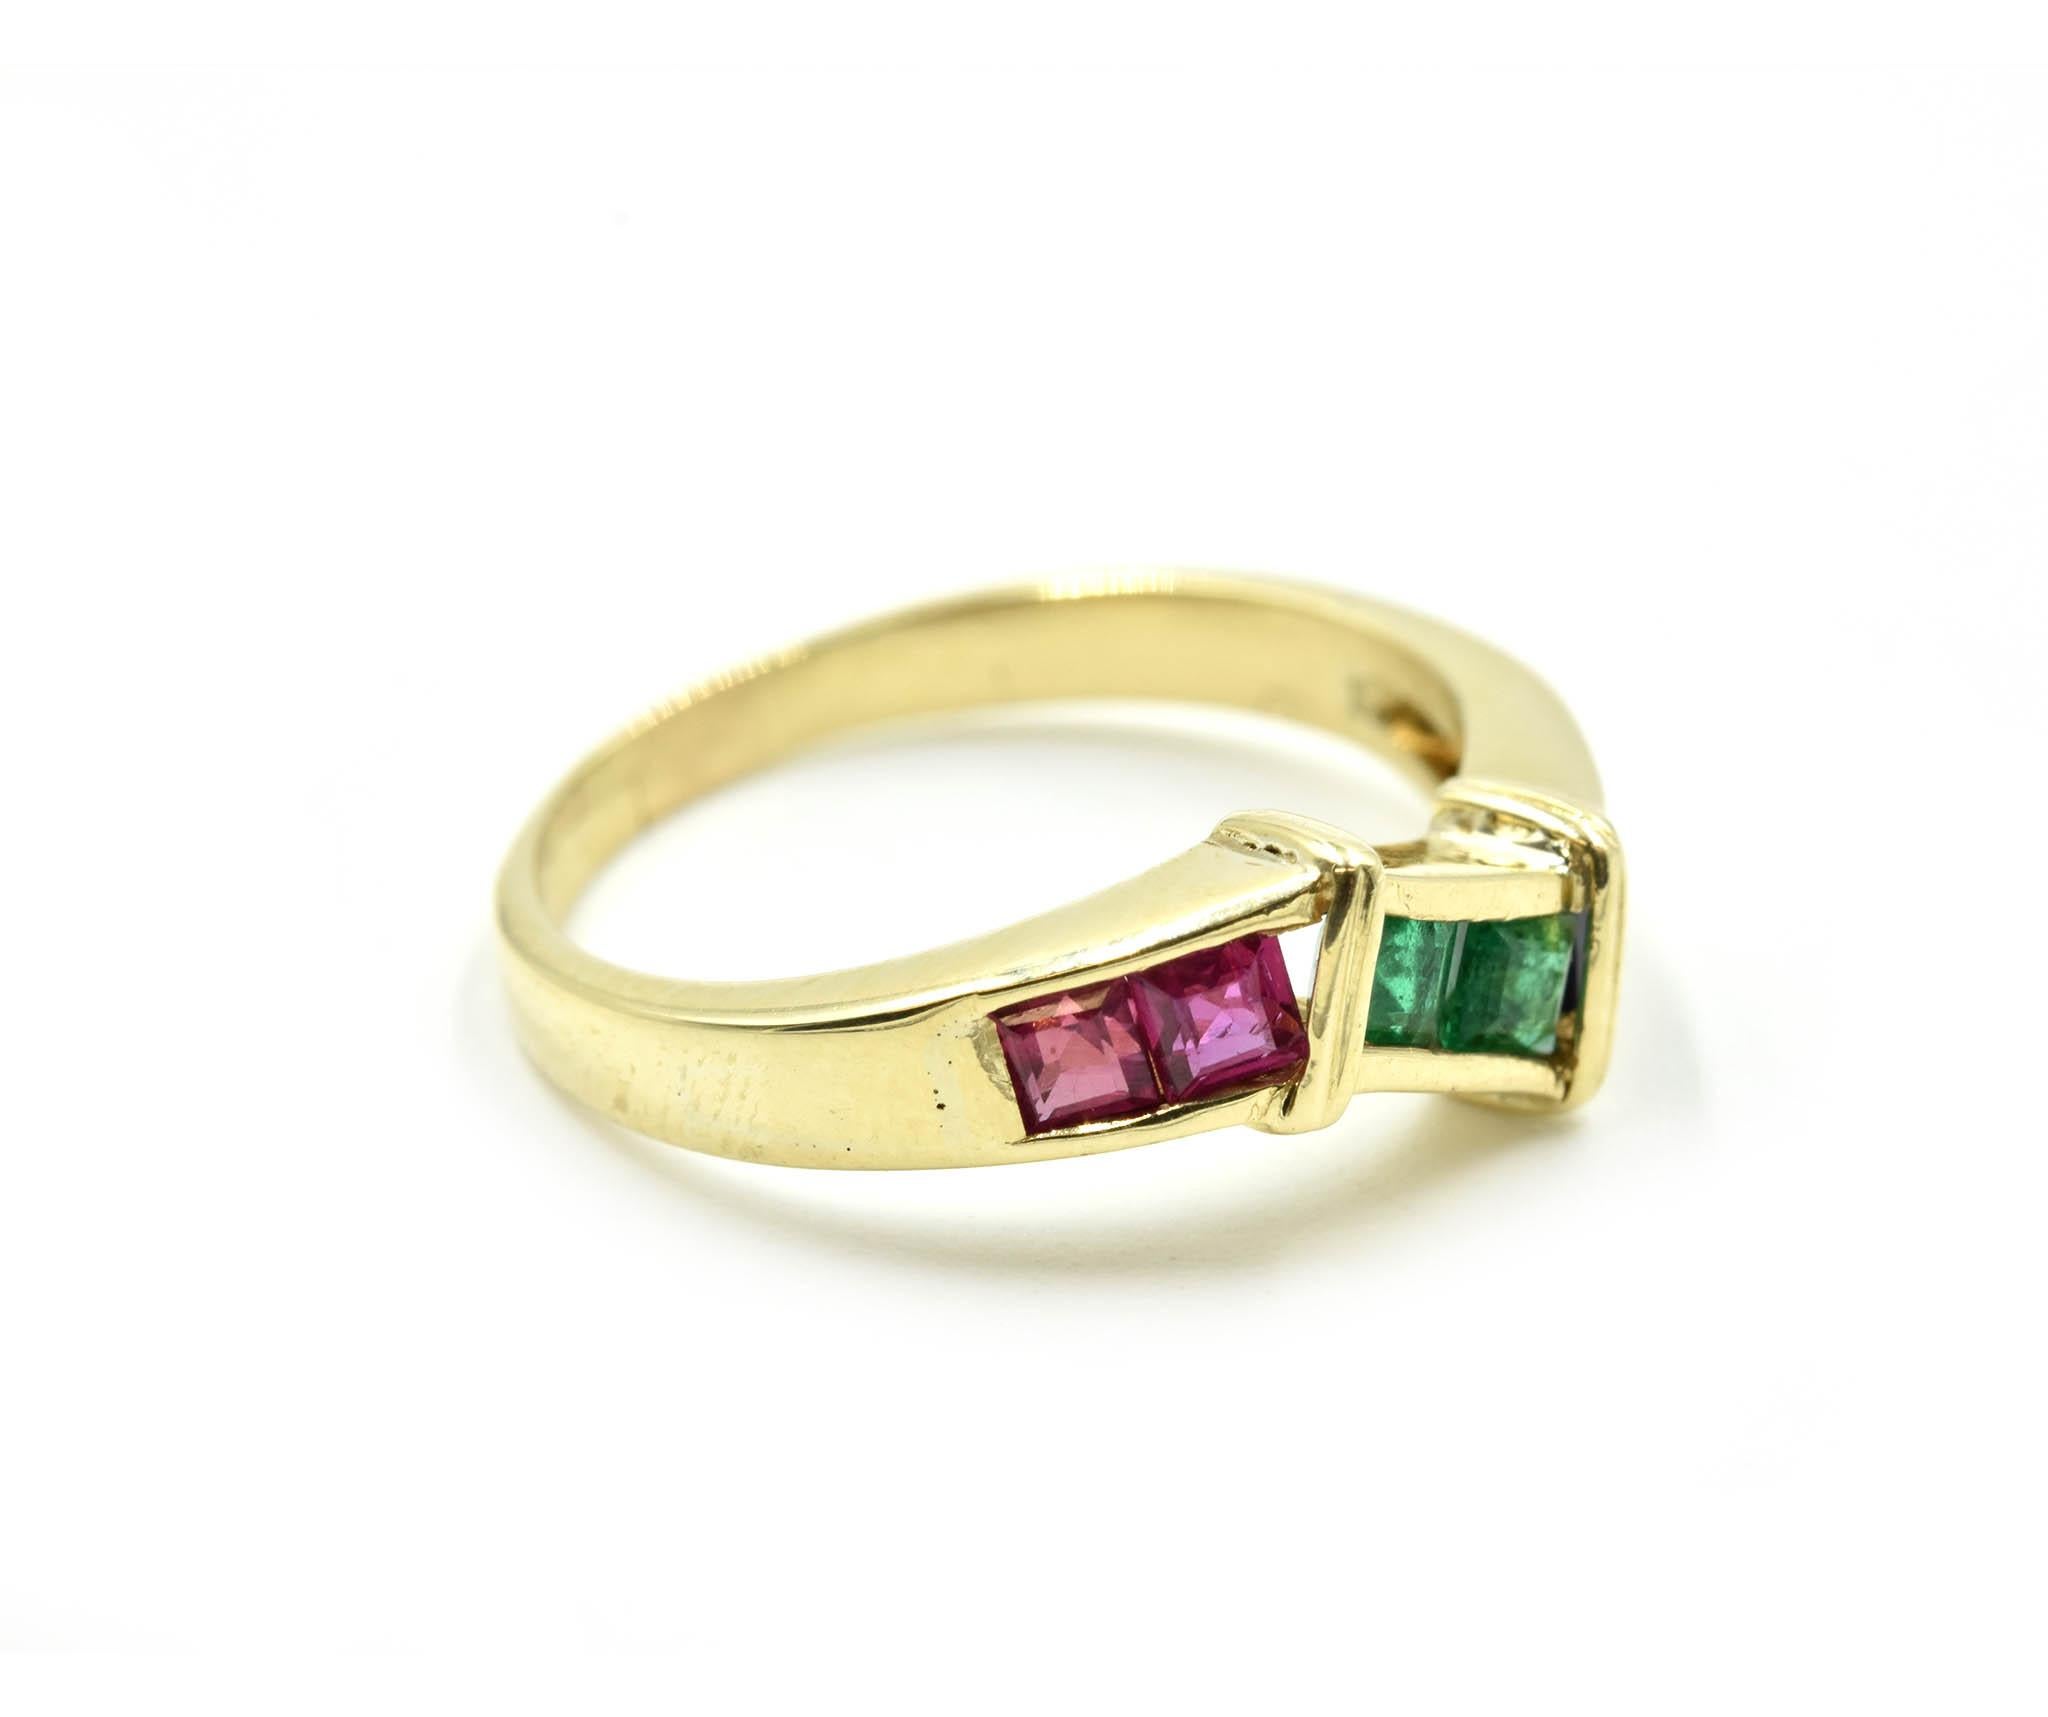 Designer: custom design
Material: 14k yellow gold
Gemstones: pink tourmaline, emeralds and sapphires
Dimensions: ring top is 5.30mm wide
Ring Size: 5 1/4 (please allow two extra shipping days for sizing requests) 
Weight: 2.60 grams
